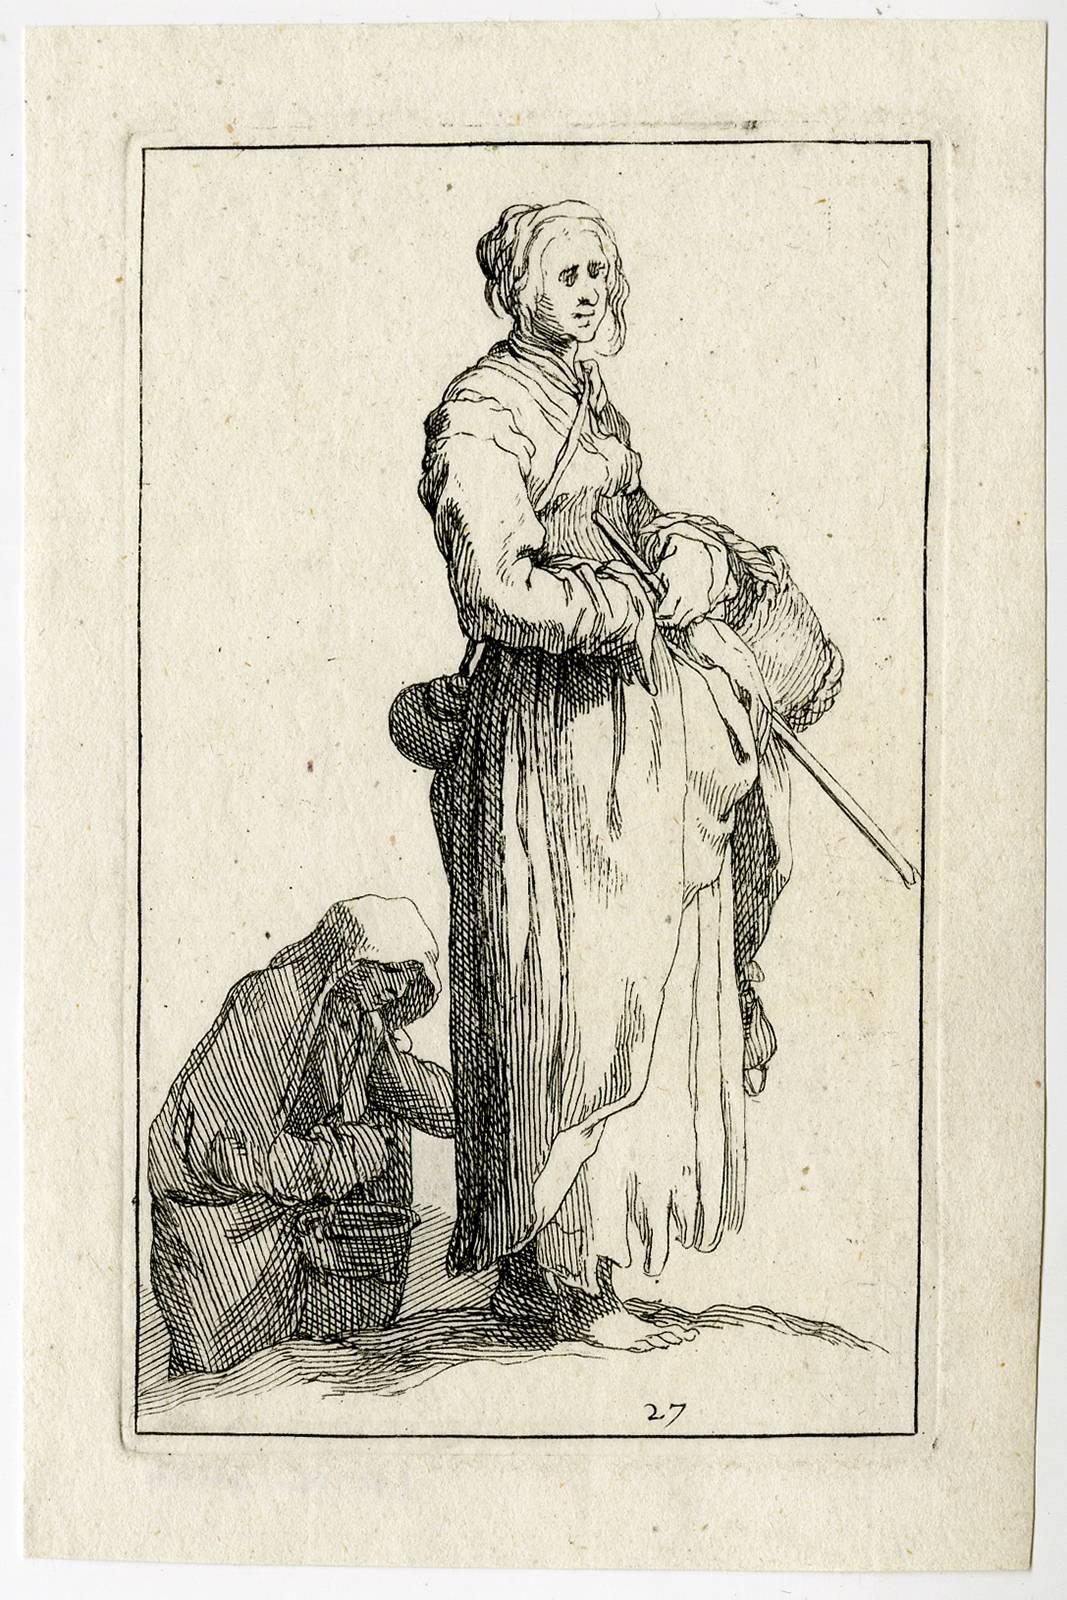 Frederik Bloemaert Figurative Print - Untitled - An old woman with a basket and stick.